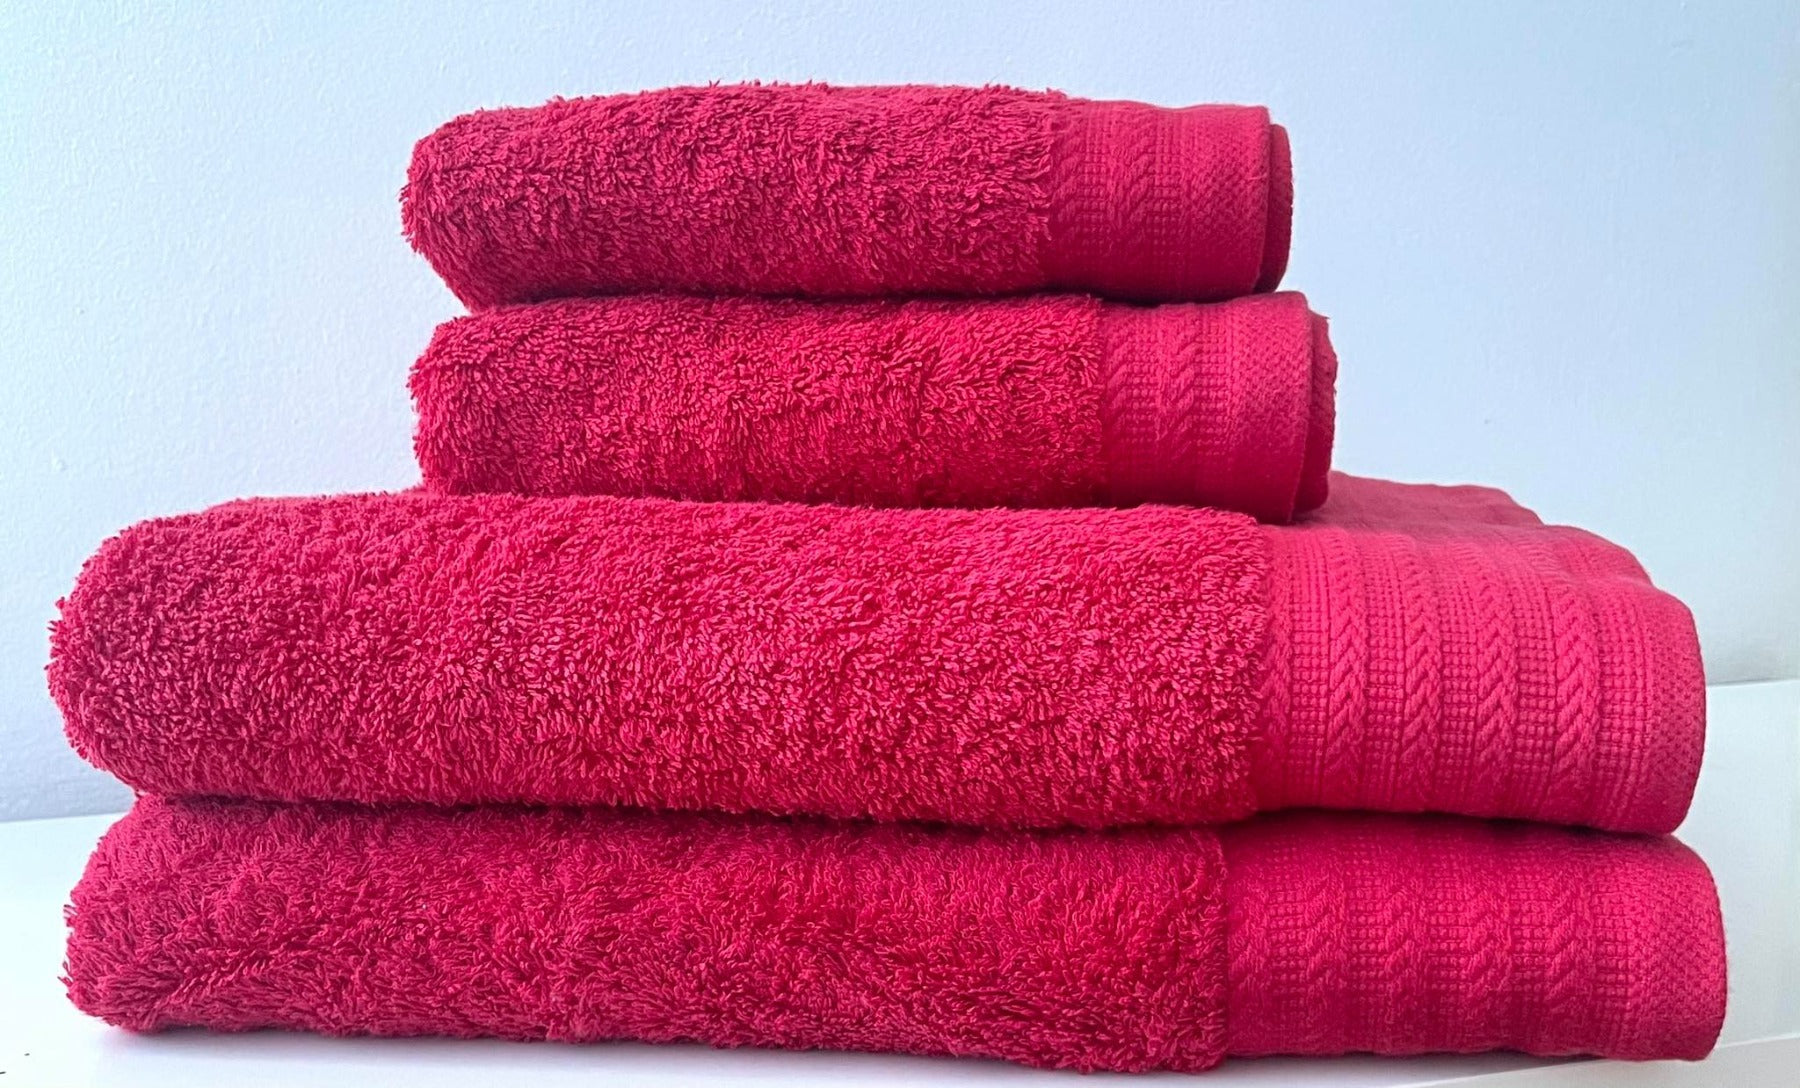 Egyptian Cotton 600g Towels, Red - 2 Sizes